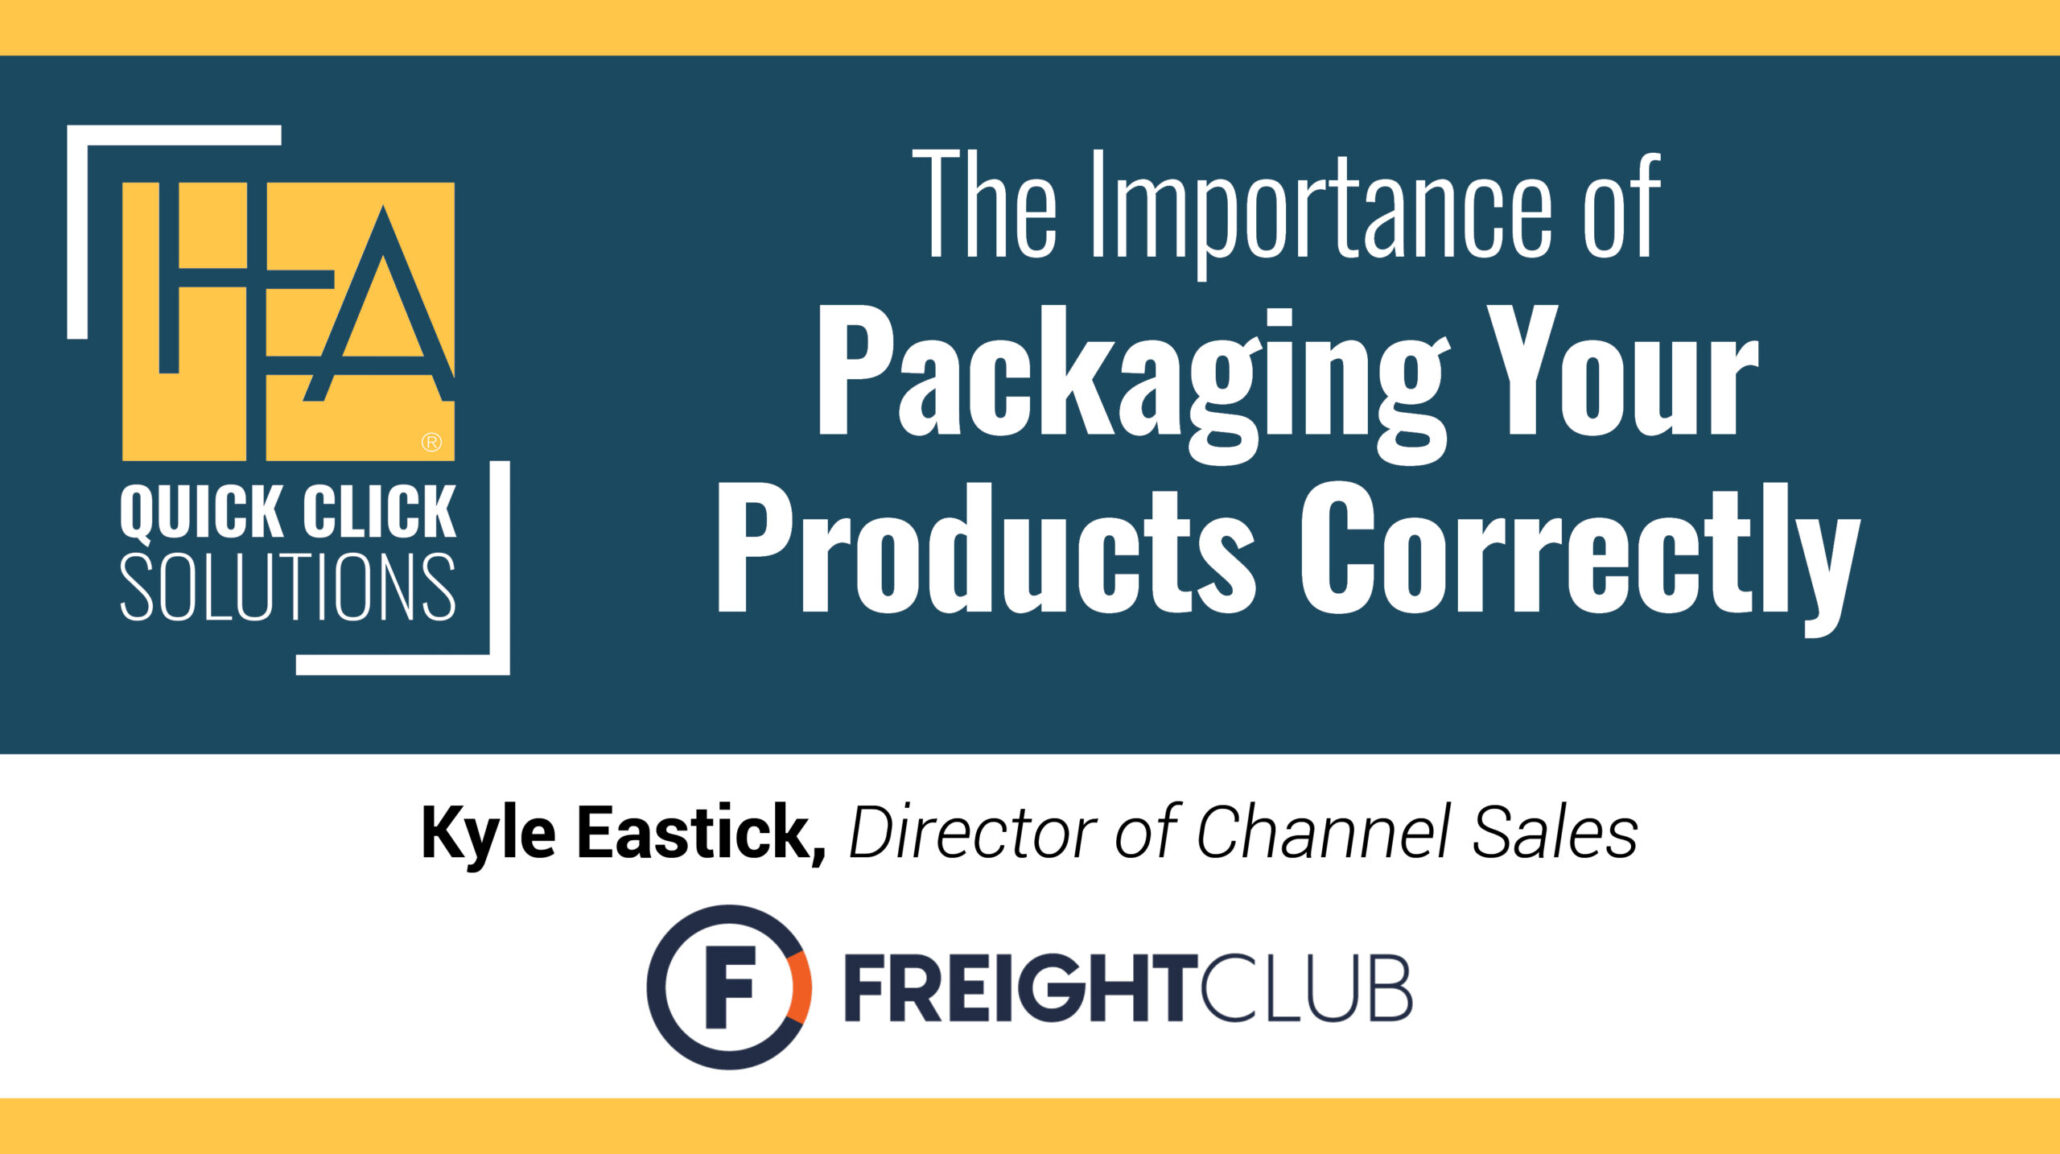 HFA-QCS Packaging Your Products Correctly